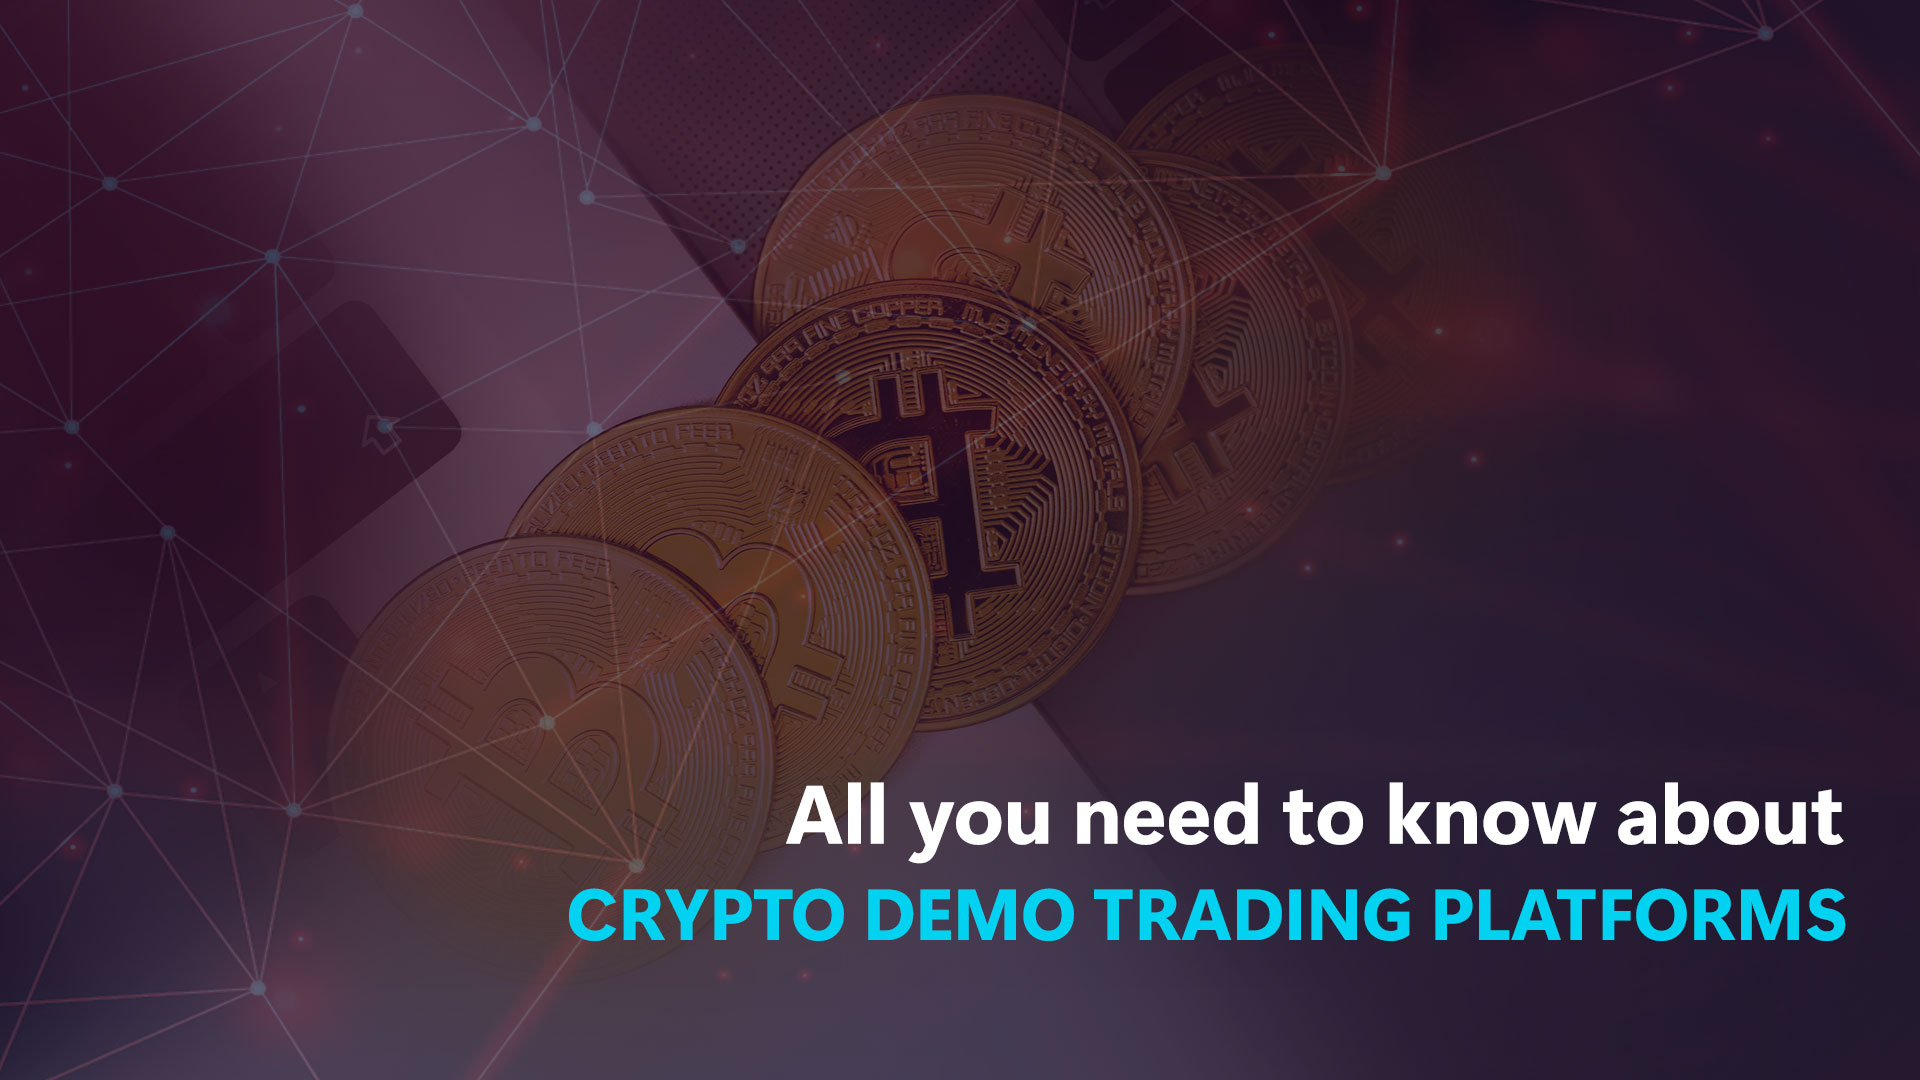 All you need to know about Crypto demo trading platforms